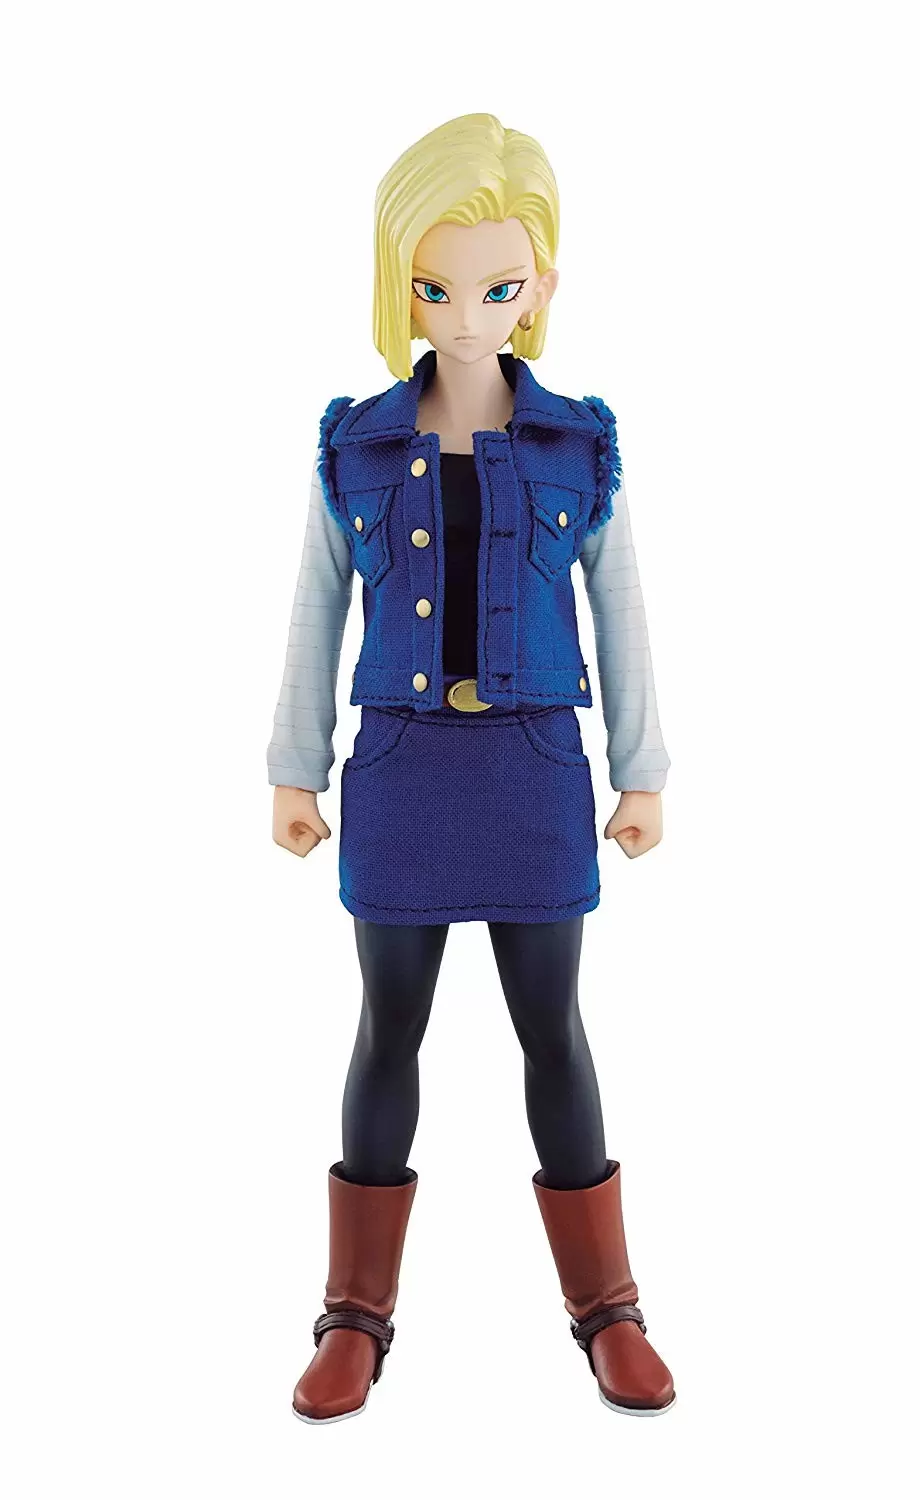 D.O.D. Dimension of DRAGONBALL - Android 18